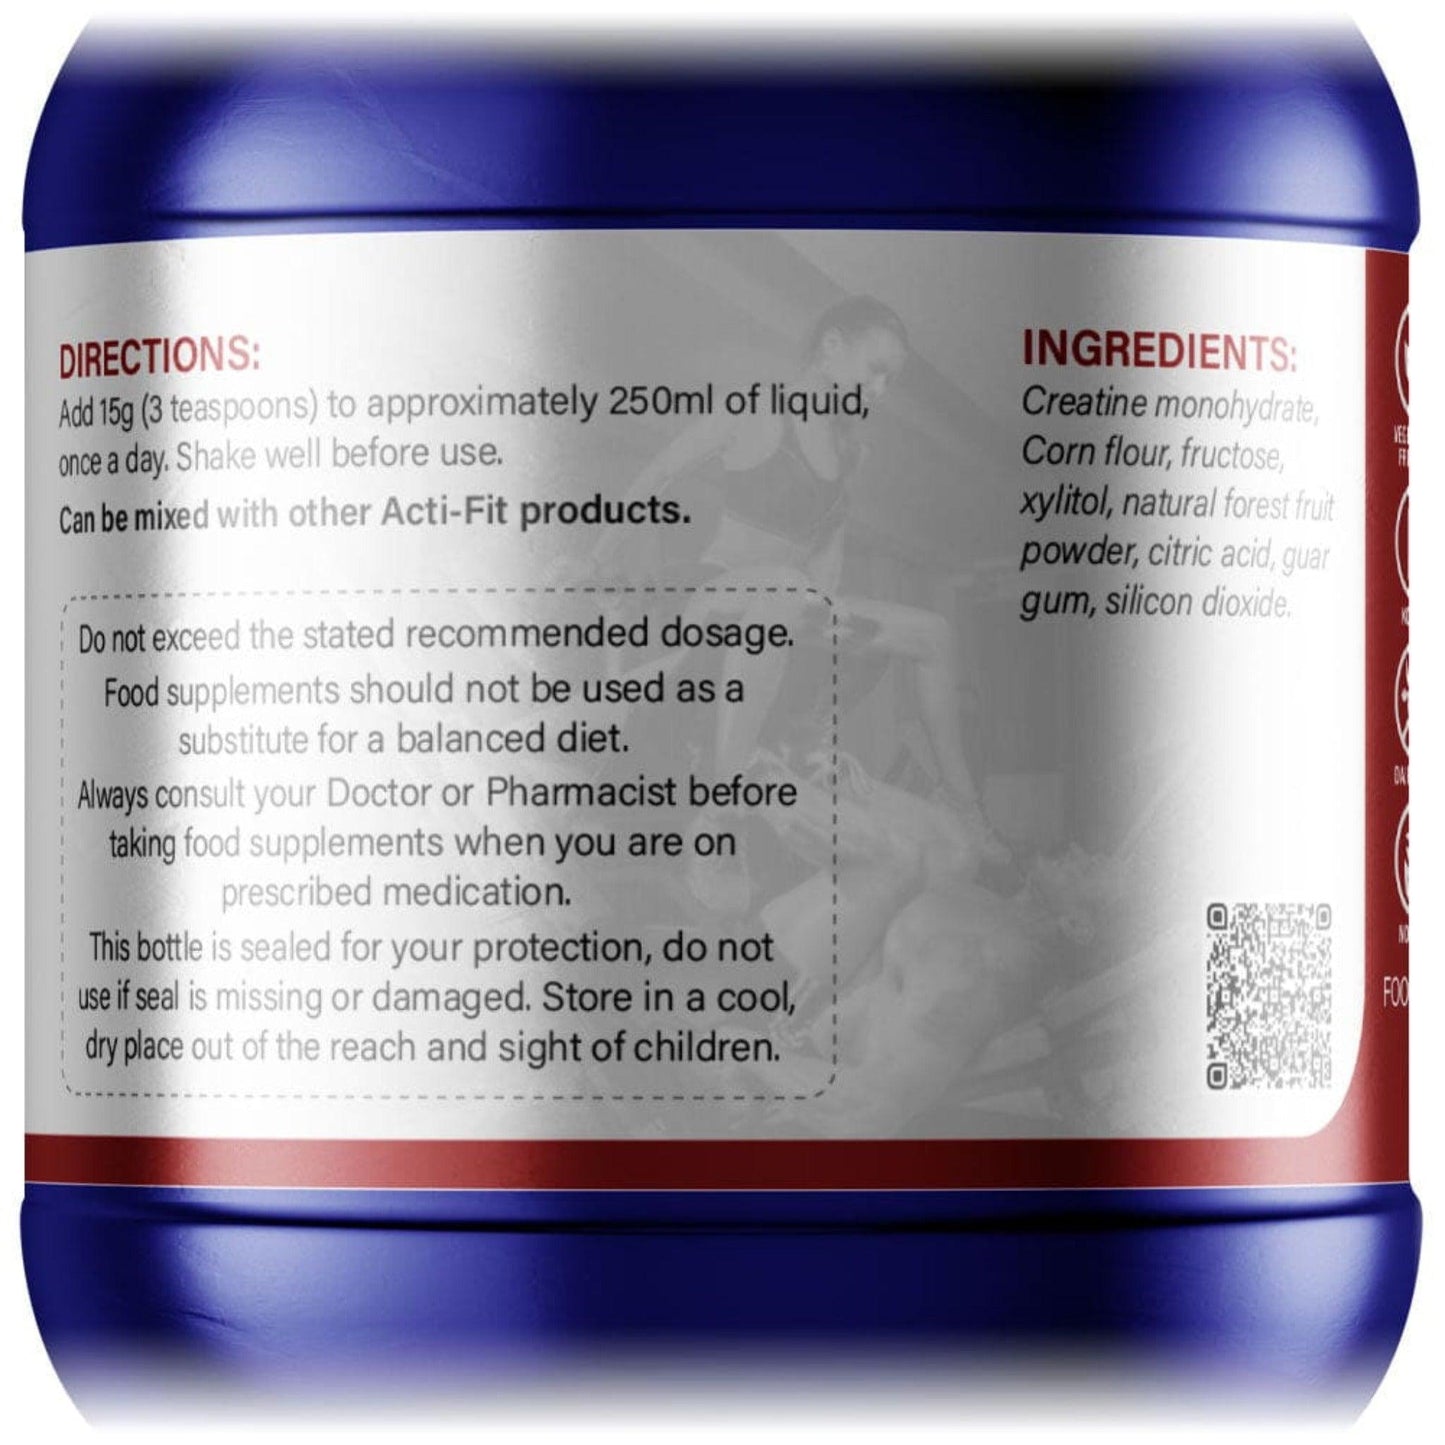 Acti-Fit's Creatine Directions and Ingredients  